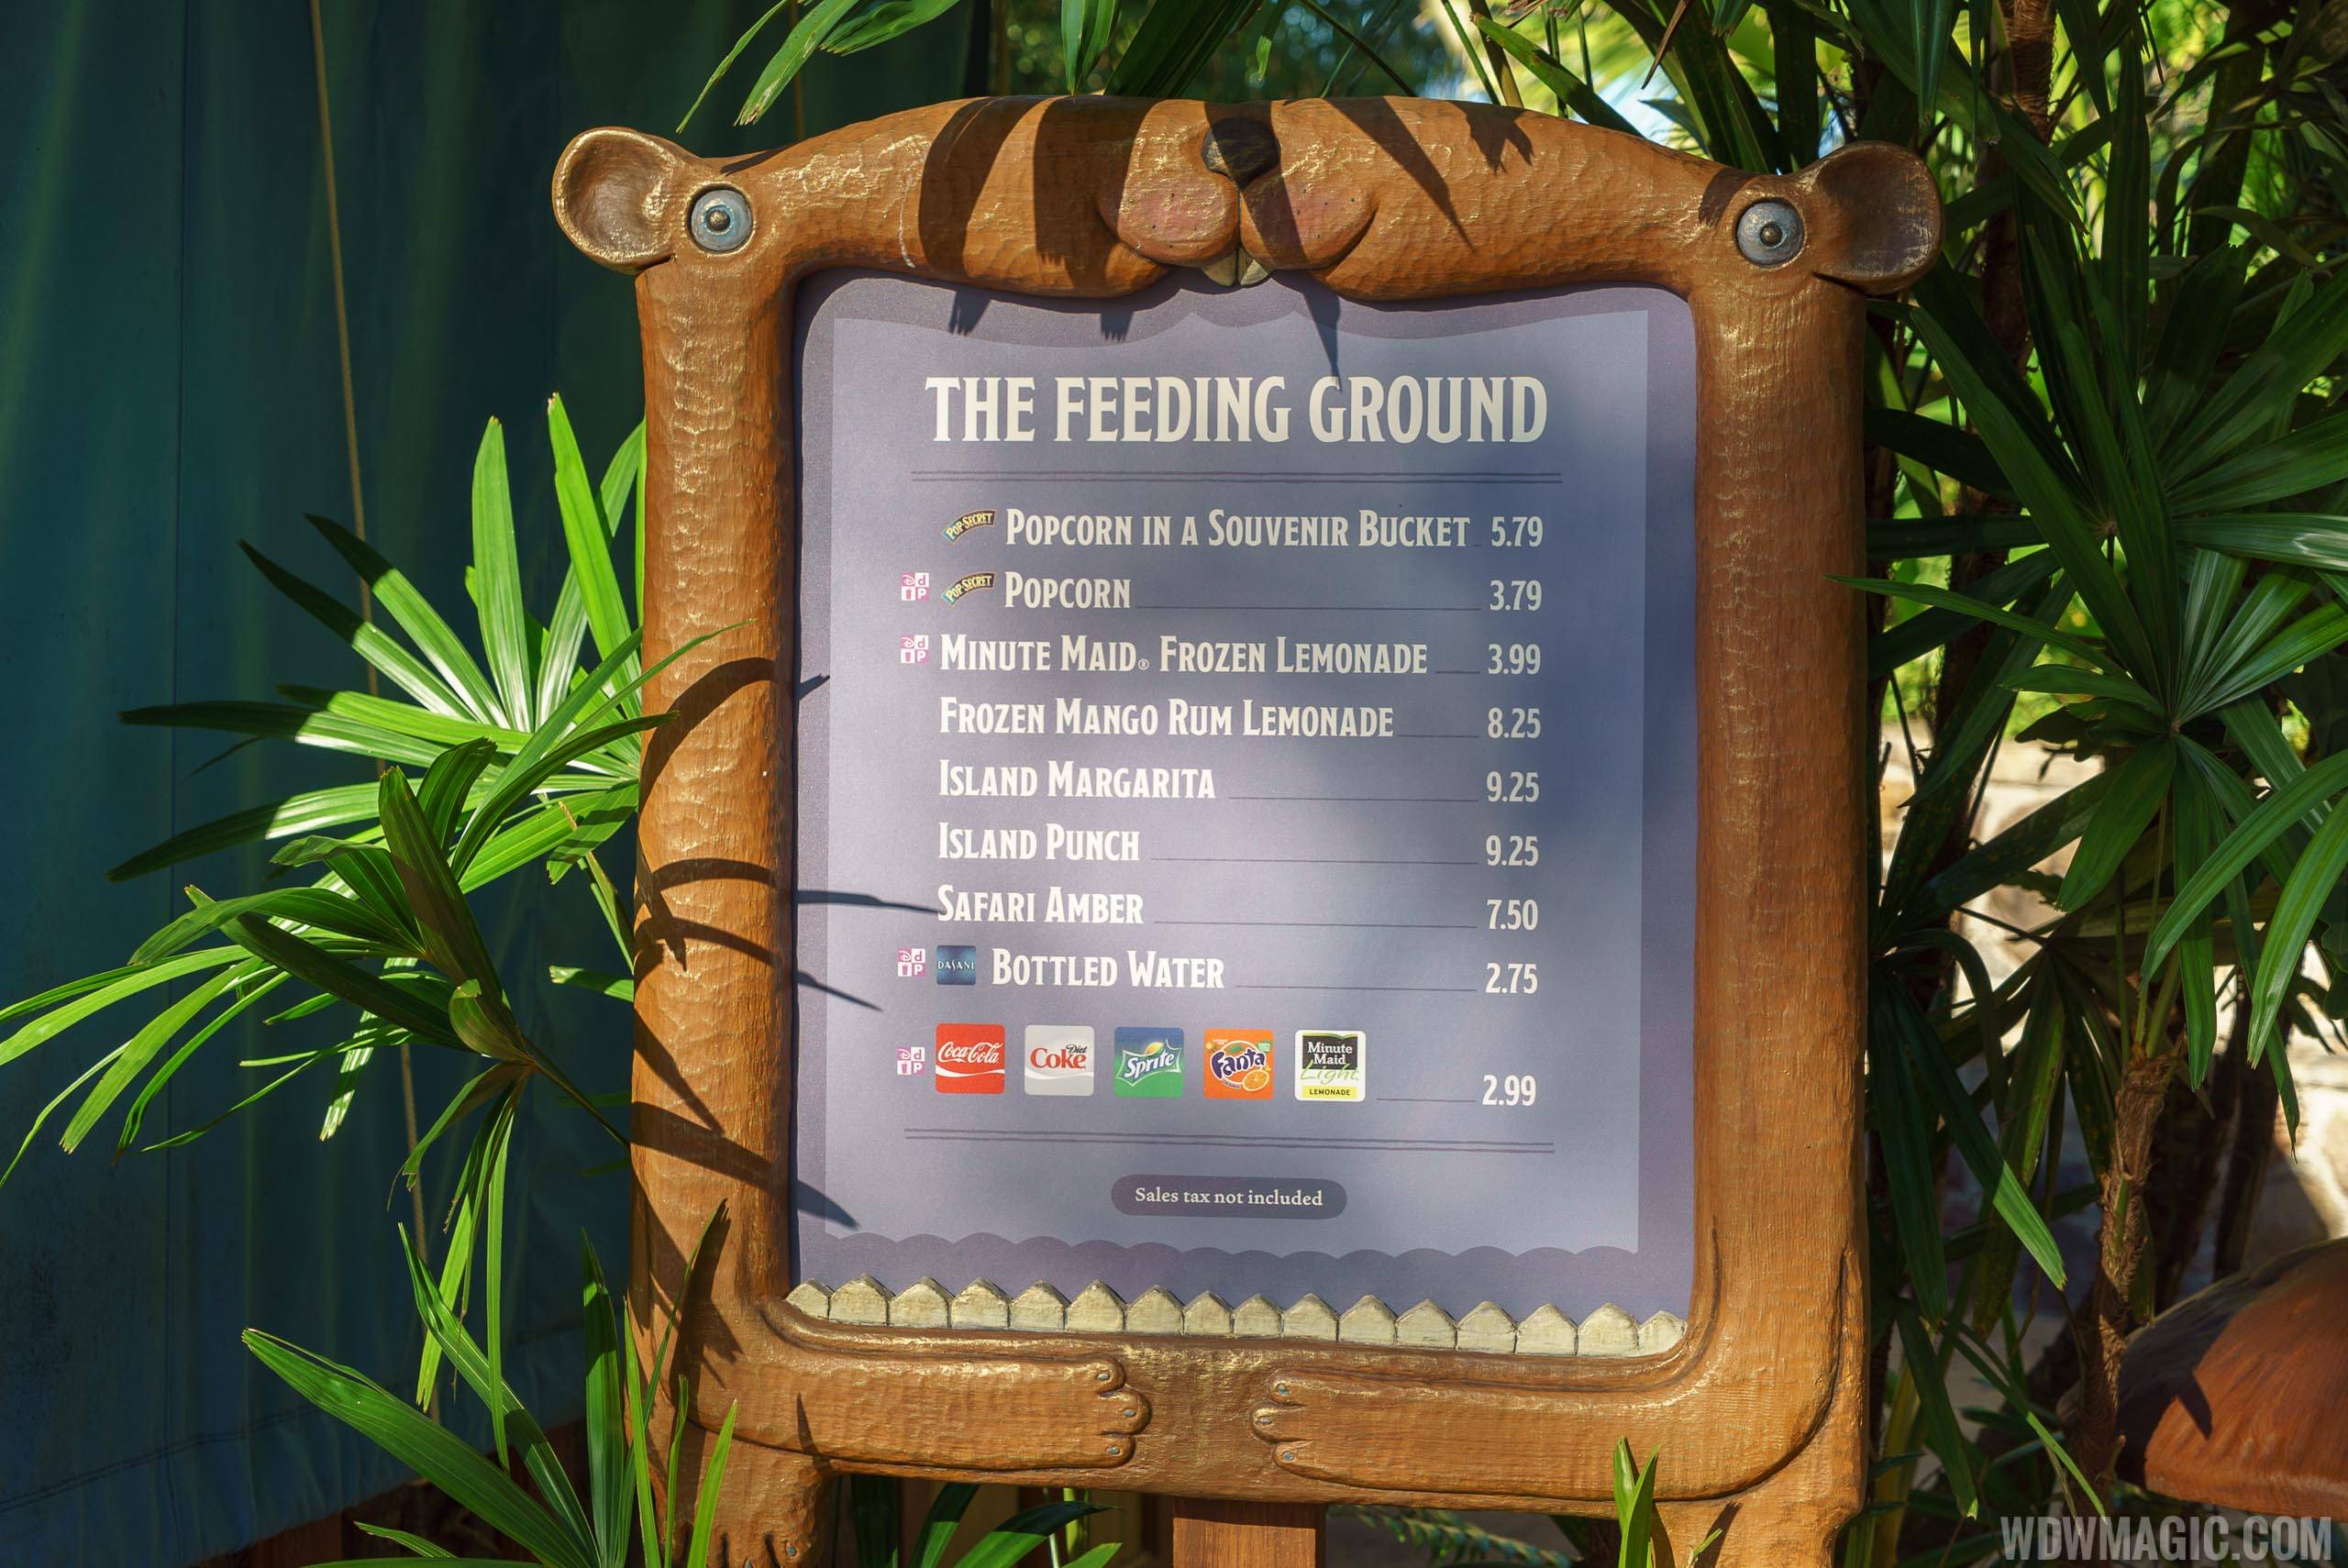 The Feeding Ground overview